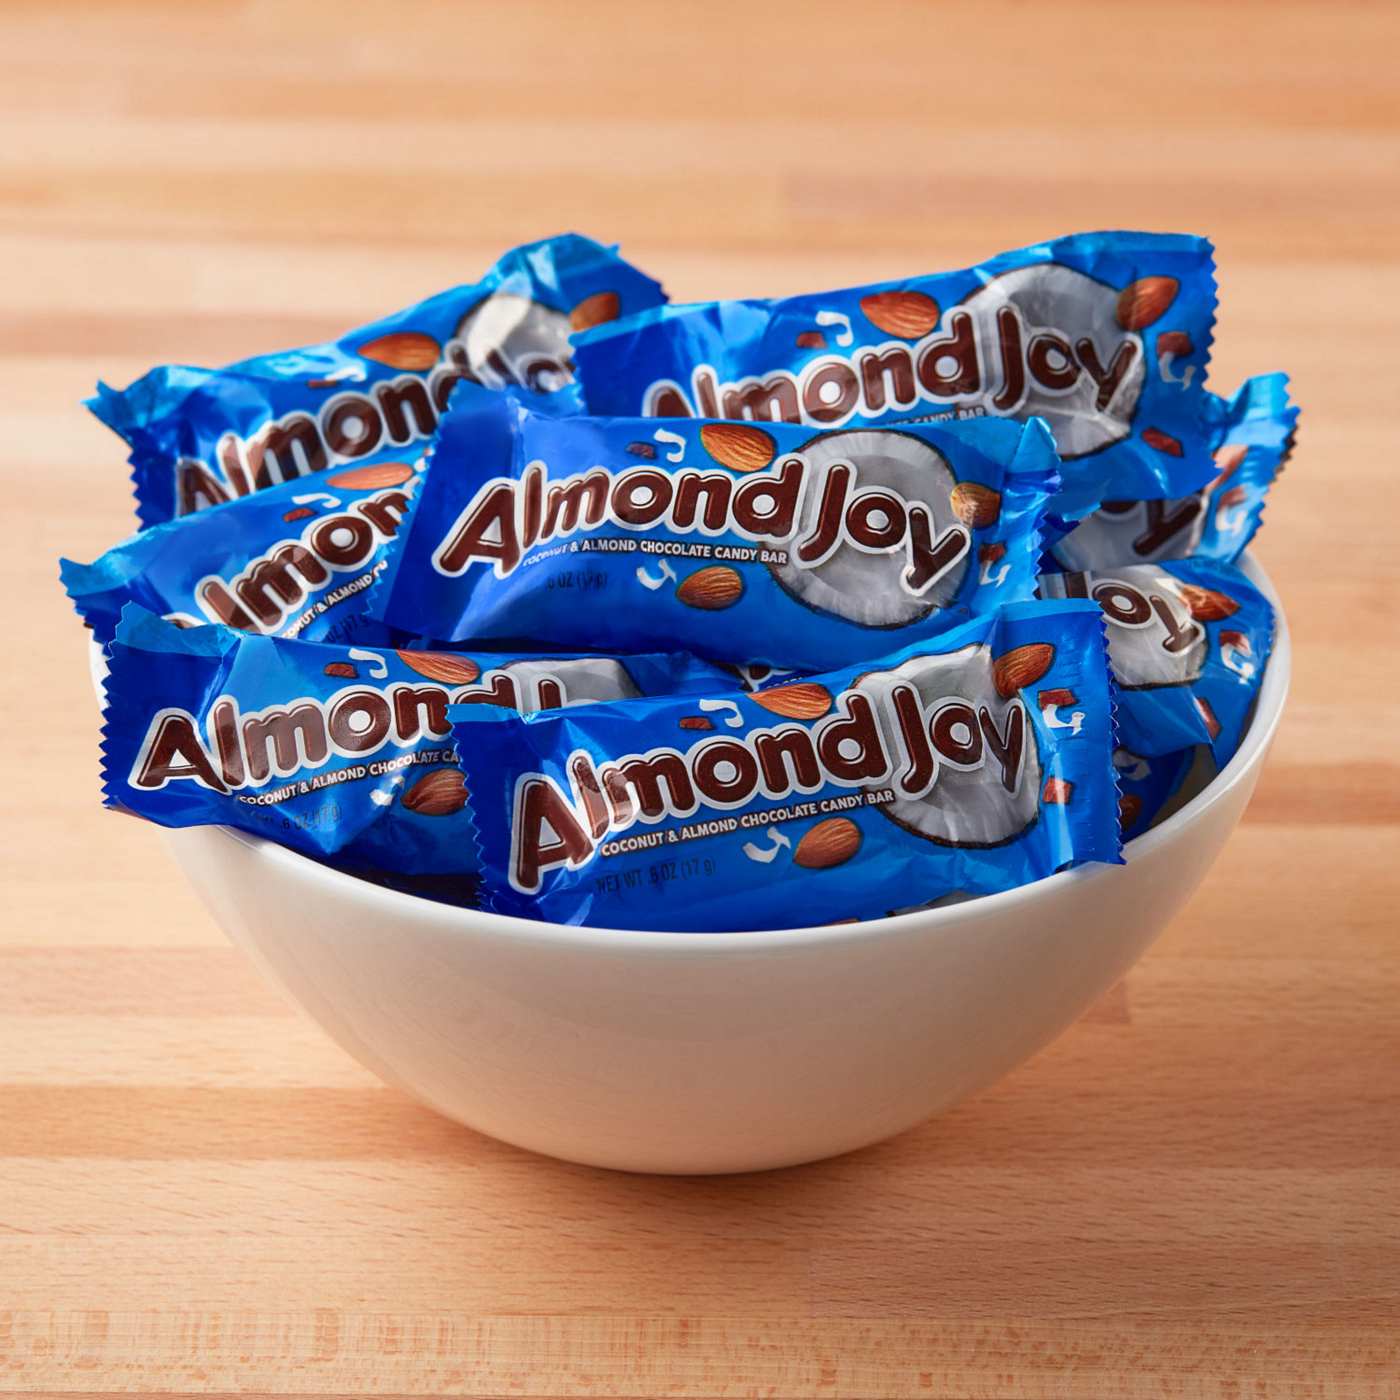 Almond Joy Coconut & Almond Chocolate Snack Size Candy Bars; image 2 of 7